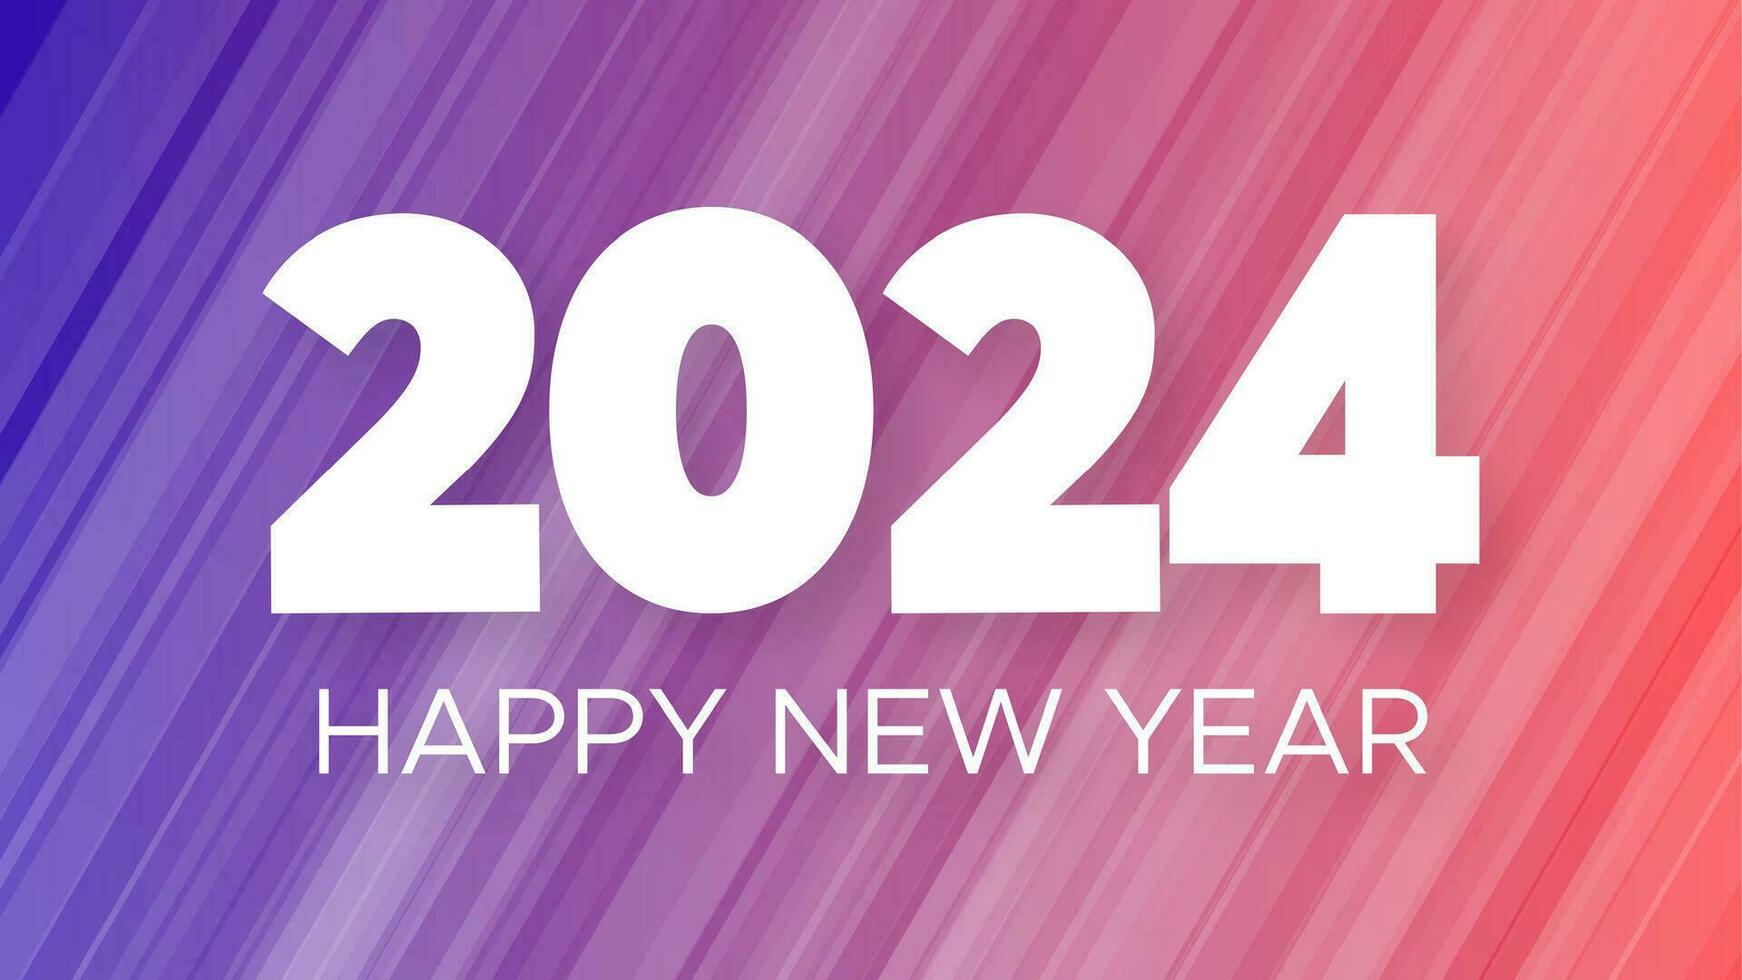 2024 Happy New Year background.  Modern greeting banner template with white 2024 New Year numbers on purple abstract background with lines. Vector illustration